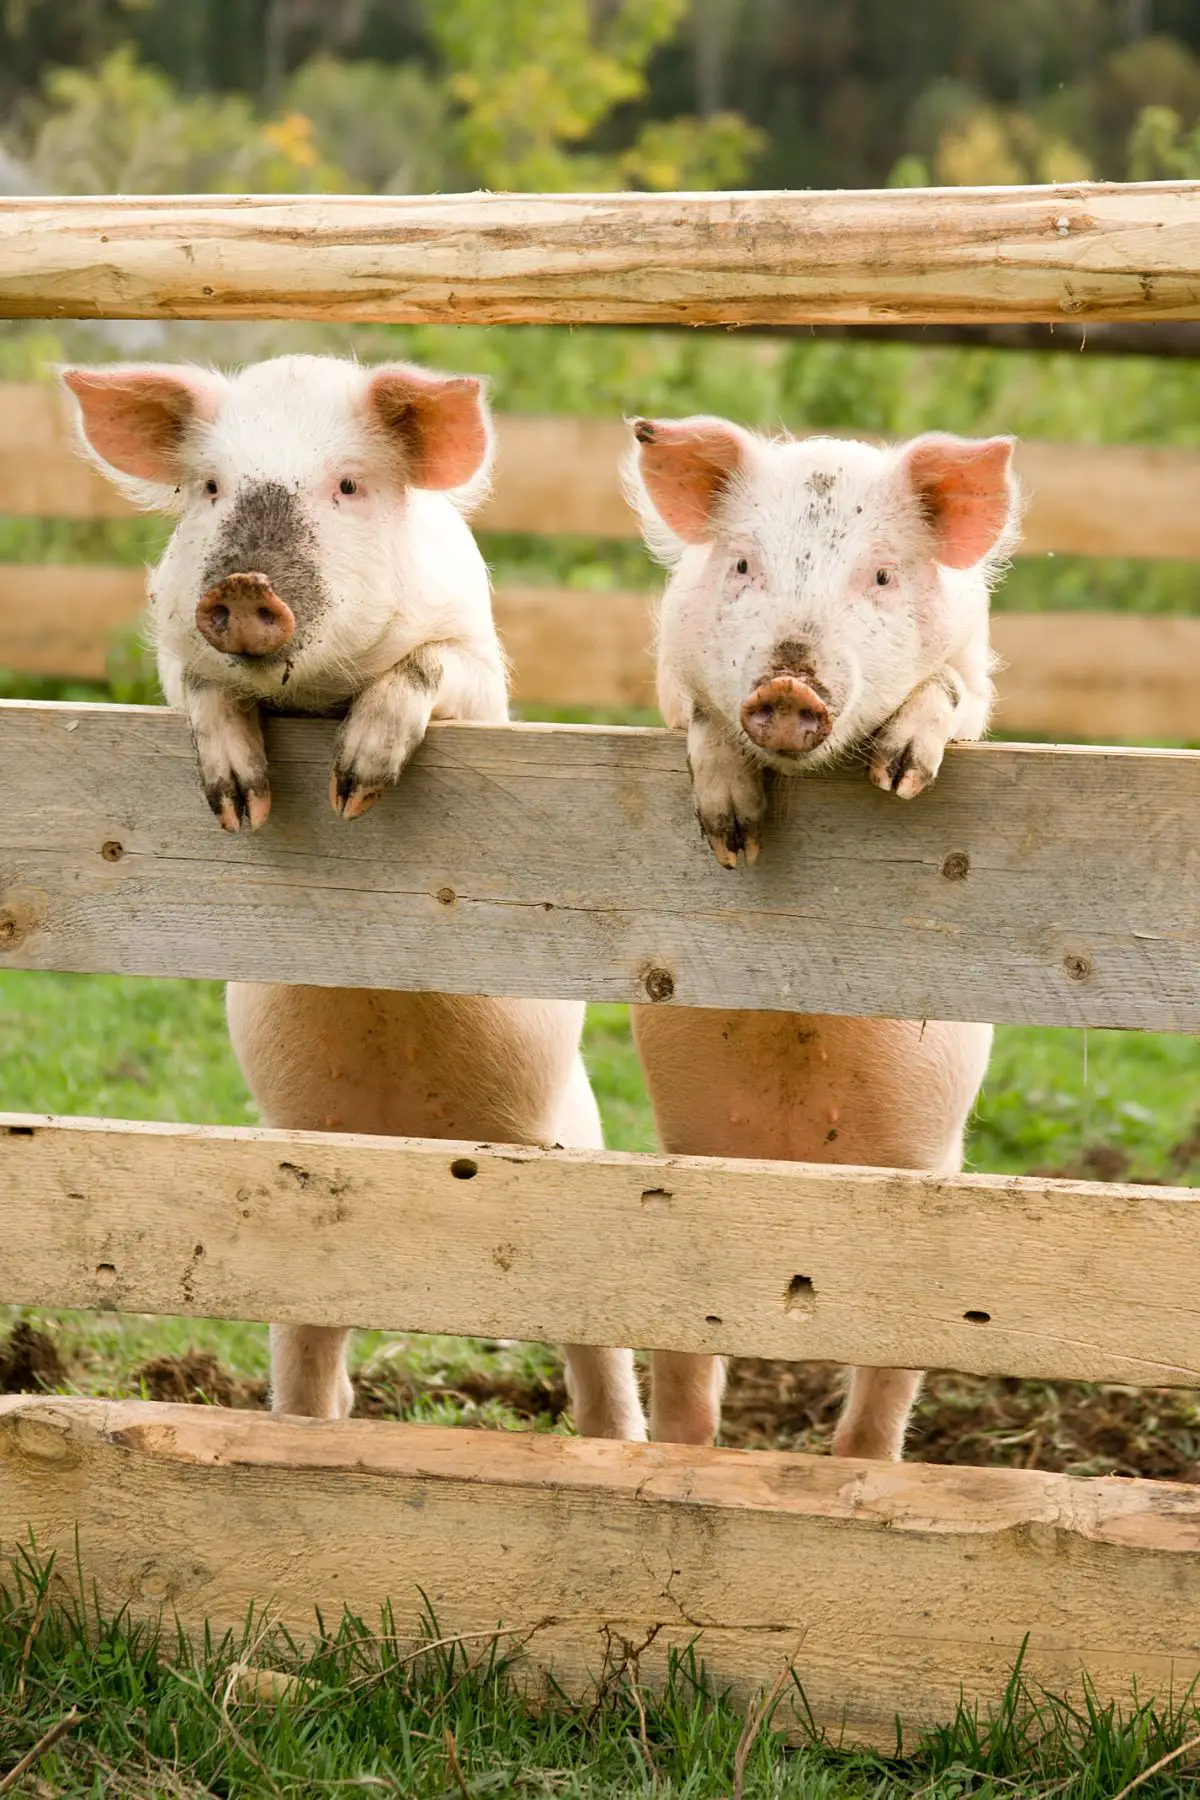 Two muddy piglets standing up leaning on a wood fence.